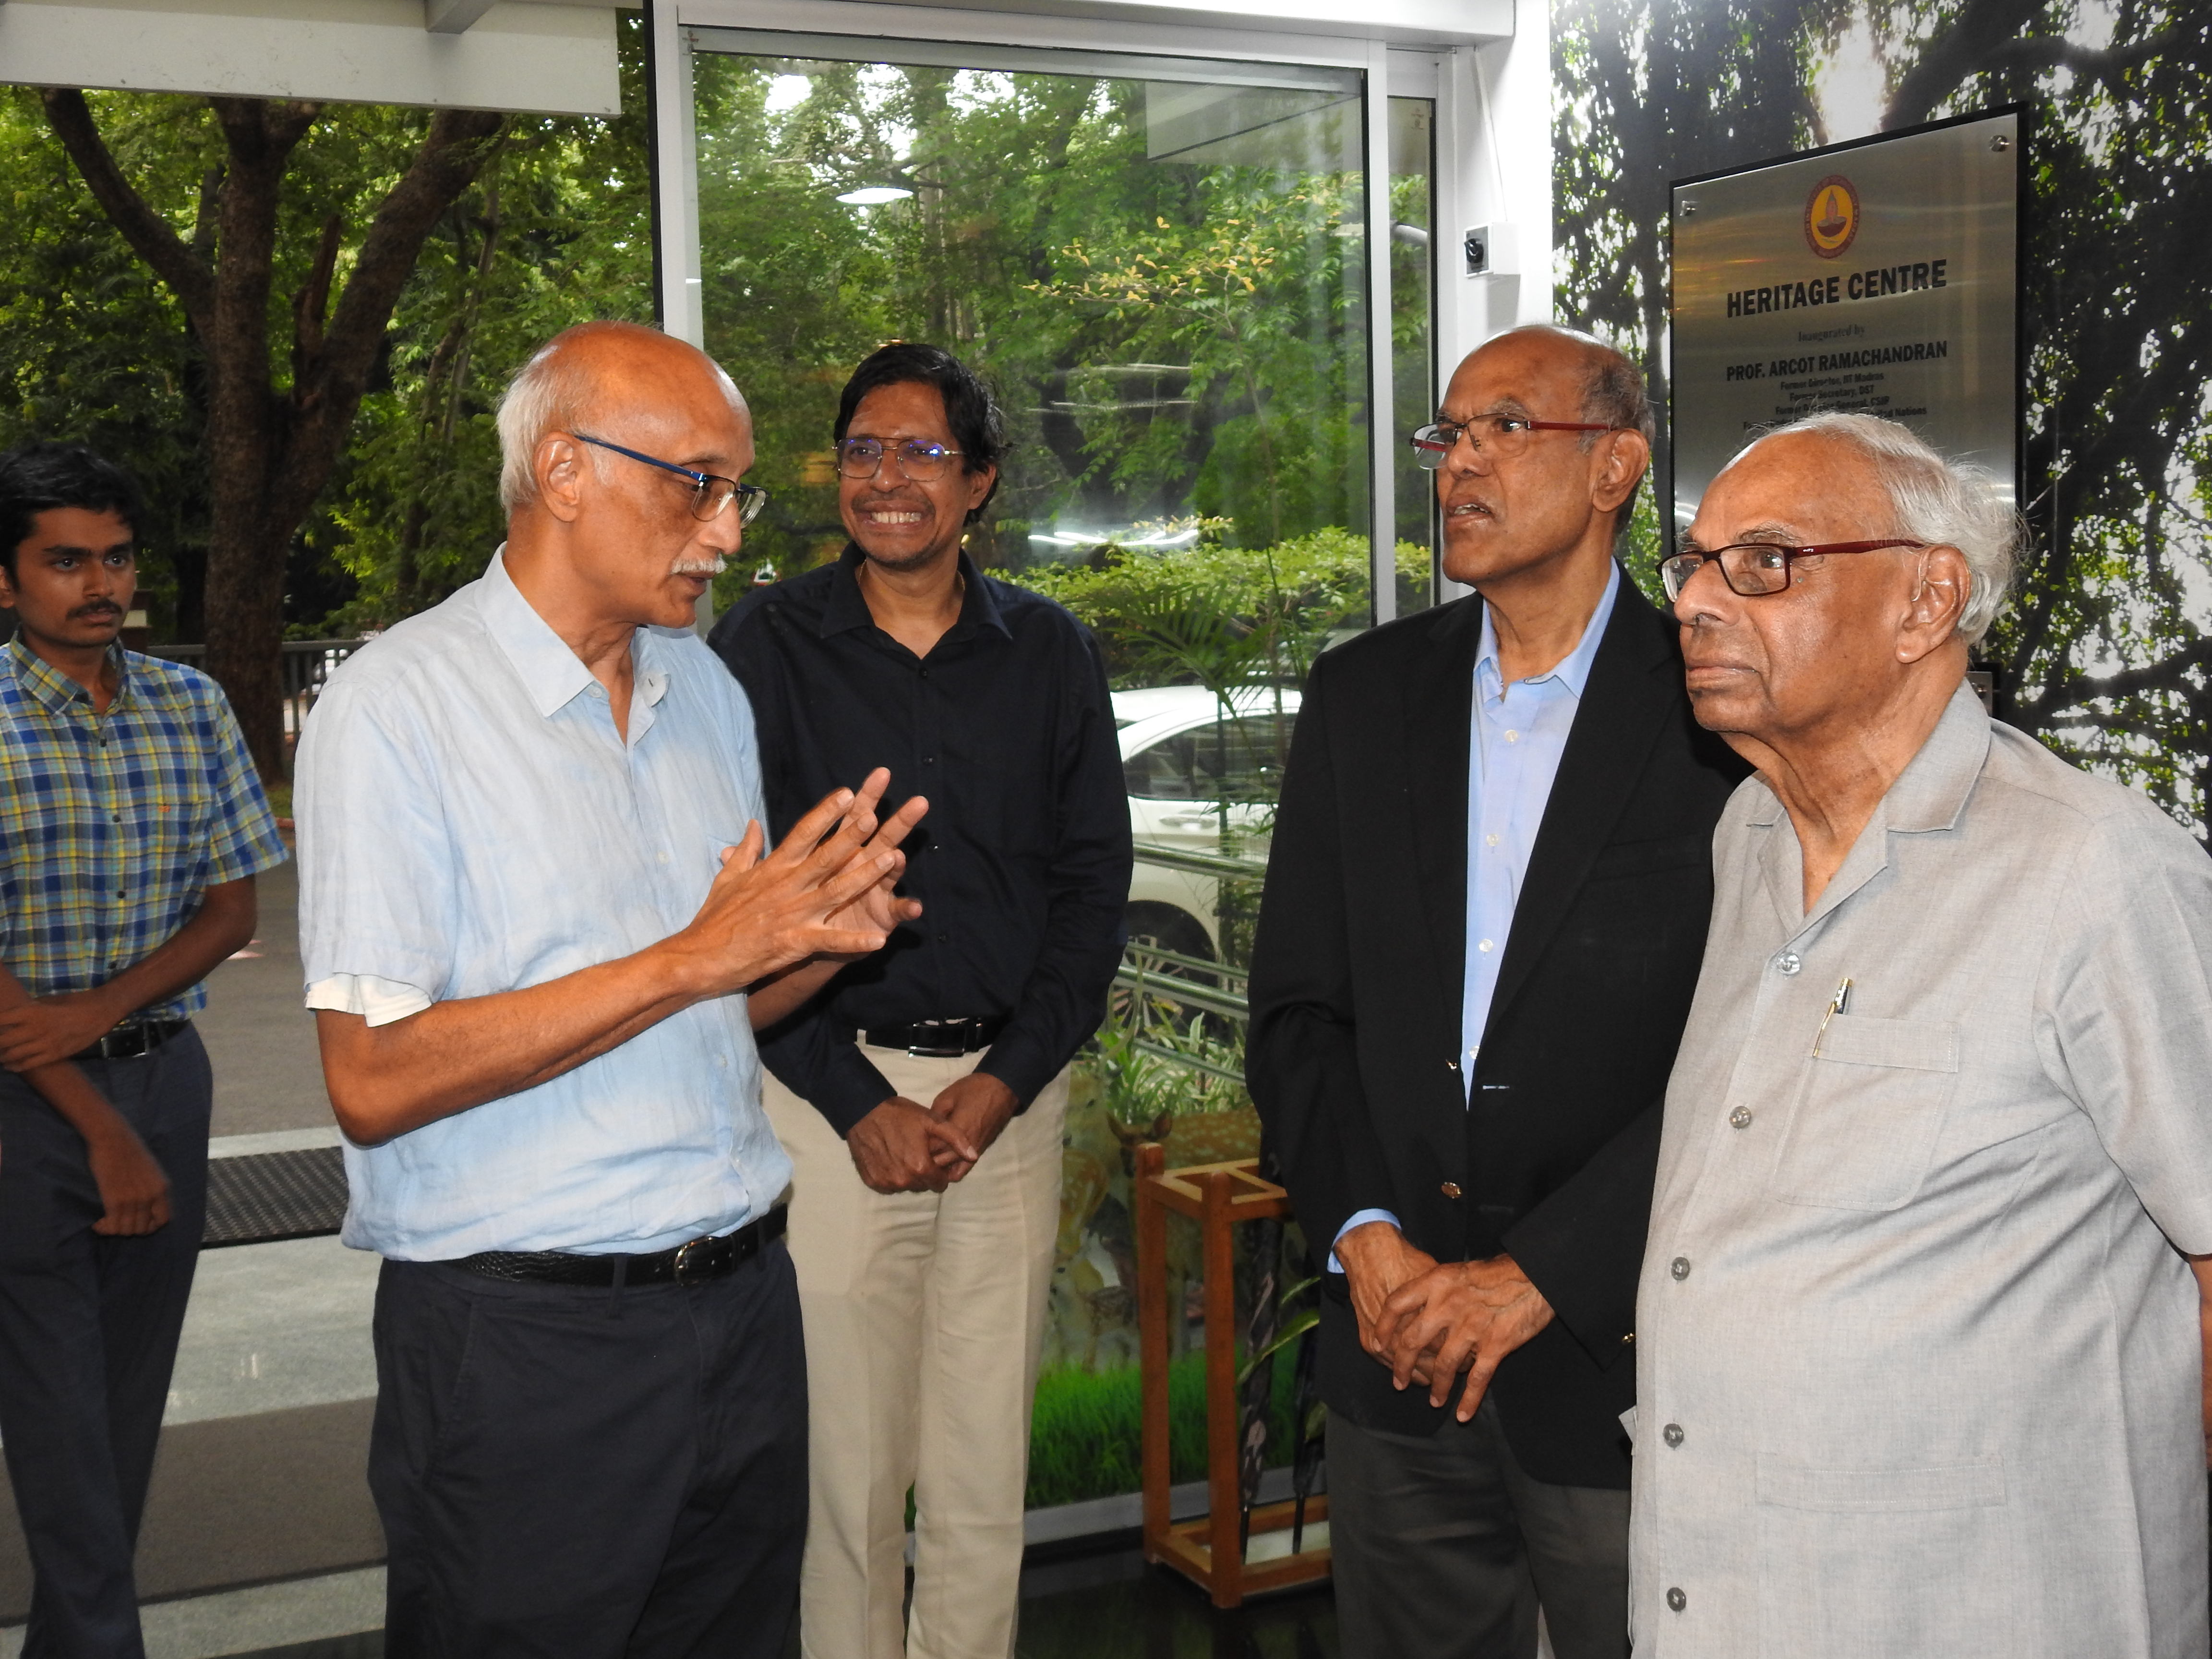 Prof. R. Nagarajan (Professor-in-charge of the Heritage Centre) explains the story behind the Heritage Centre to the distinguished guests